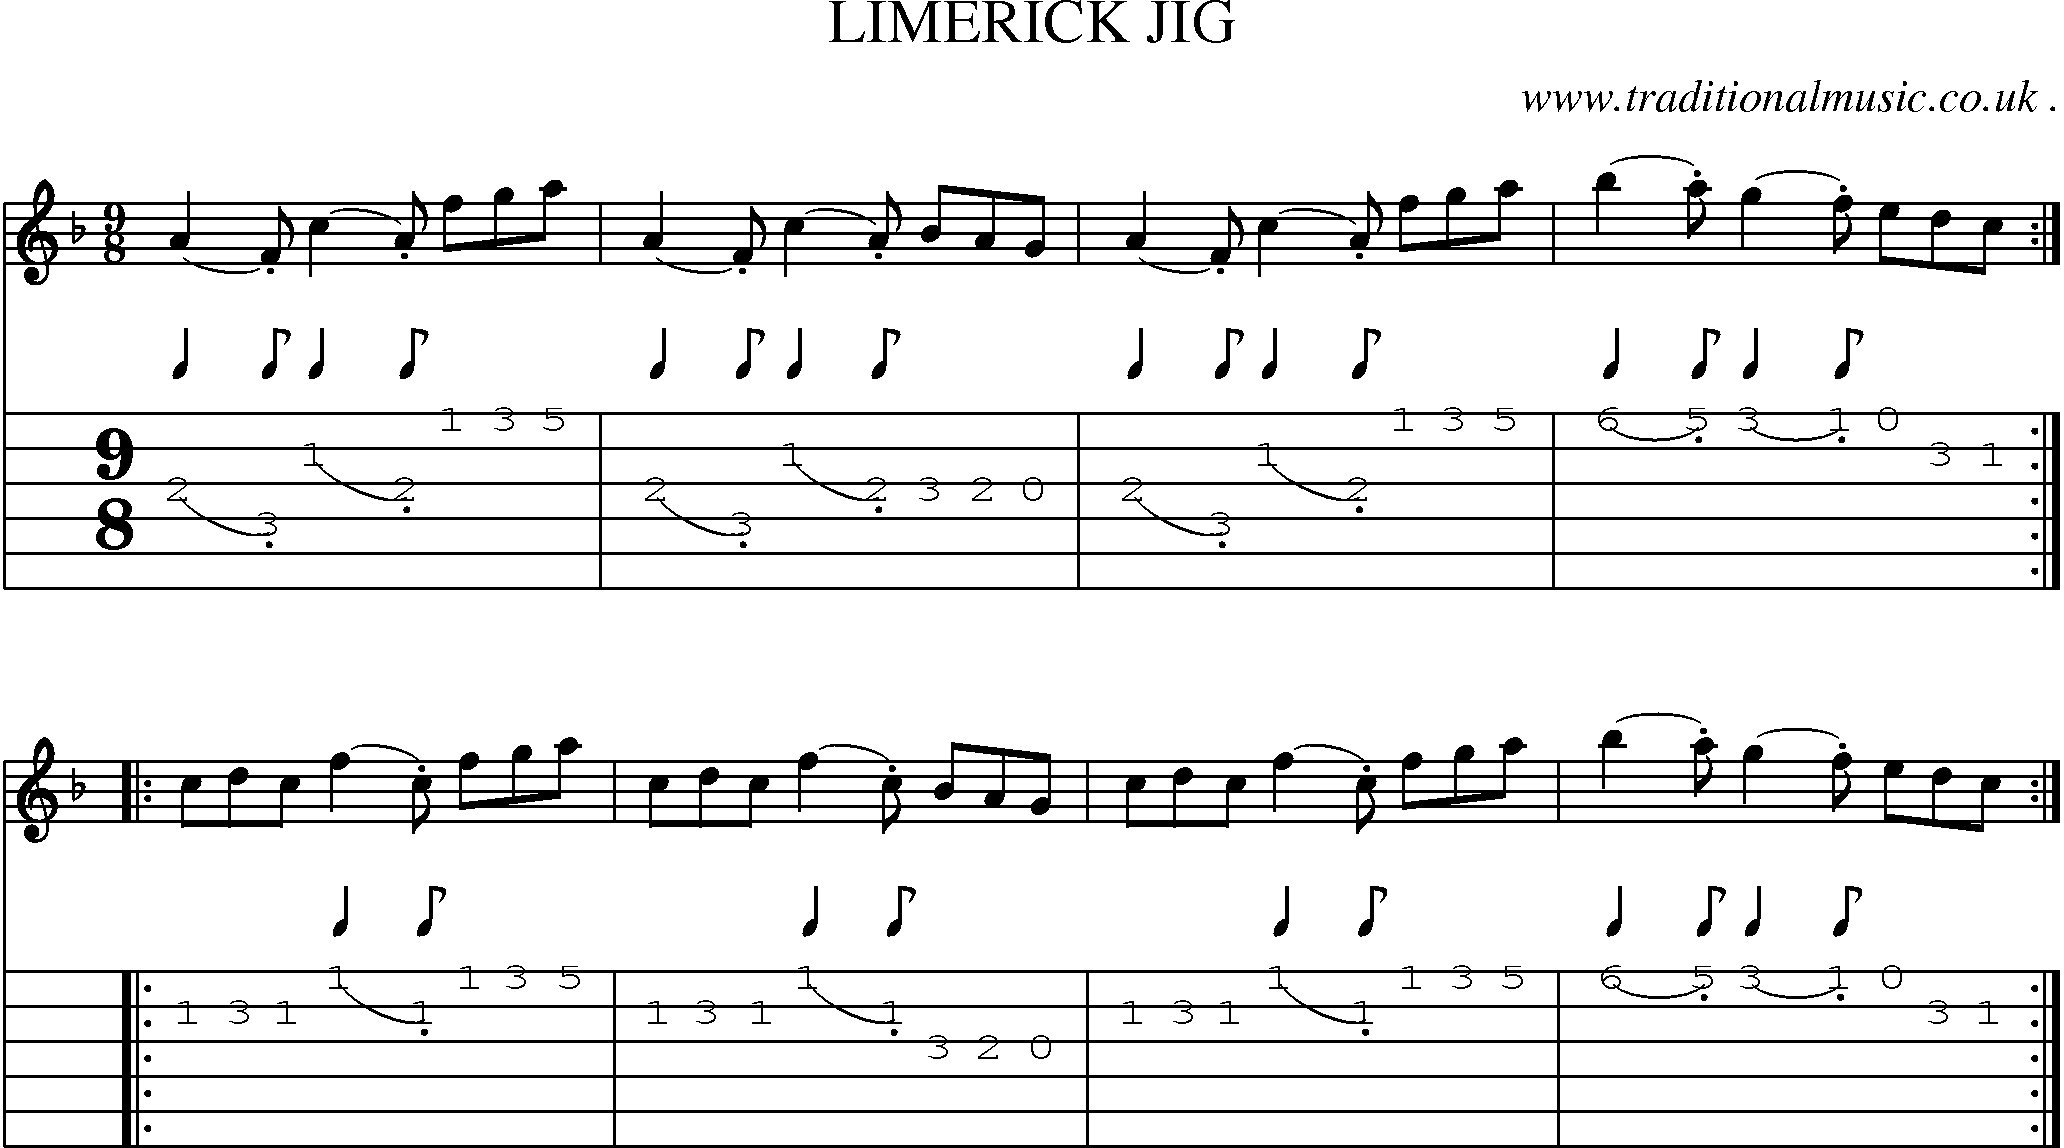 Sheet-Music and Guitar Tabs for Limerick Jig